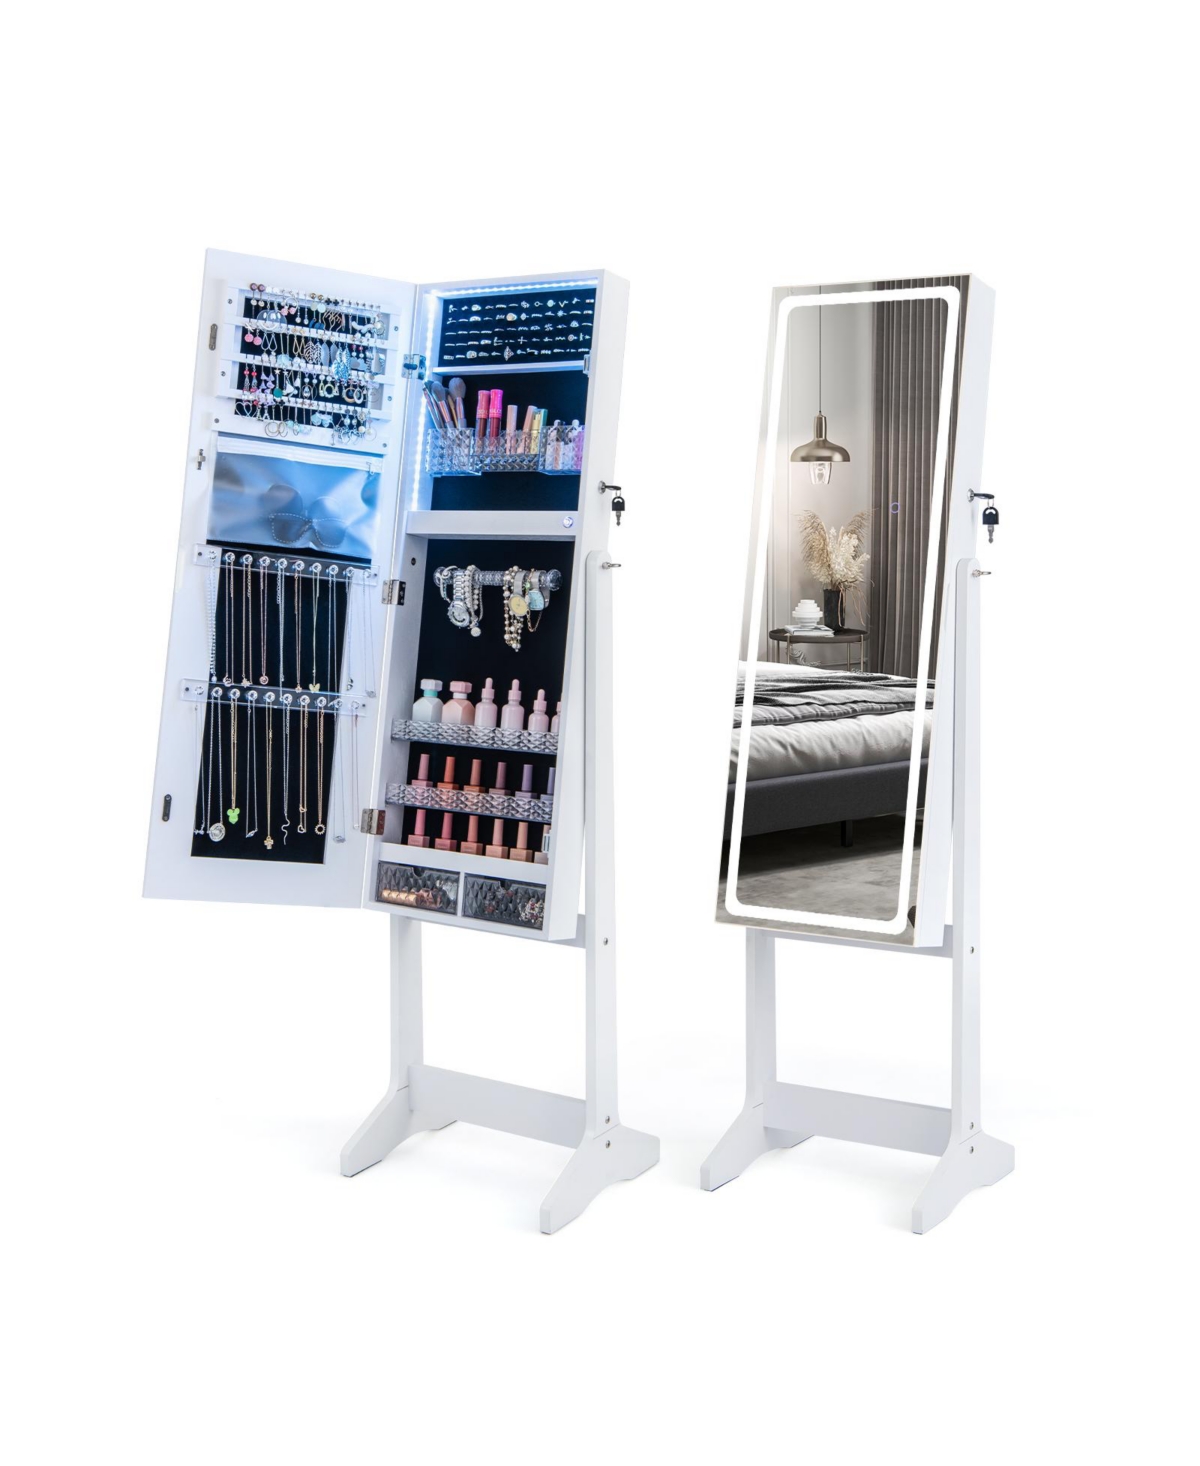 Lockable Jewelry Armoire Standing Cabinet with Lighted Full-Length Mirror - White